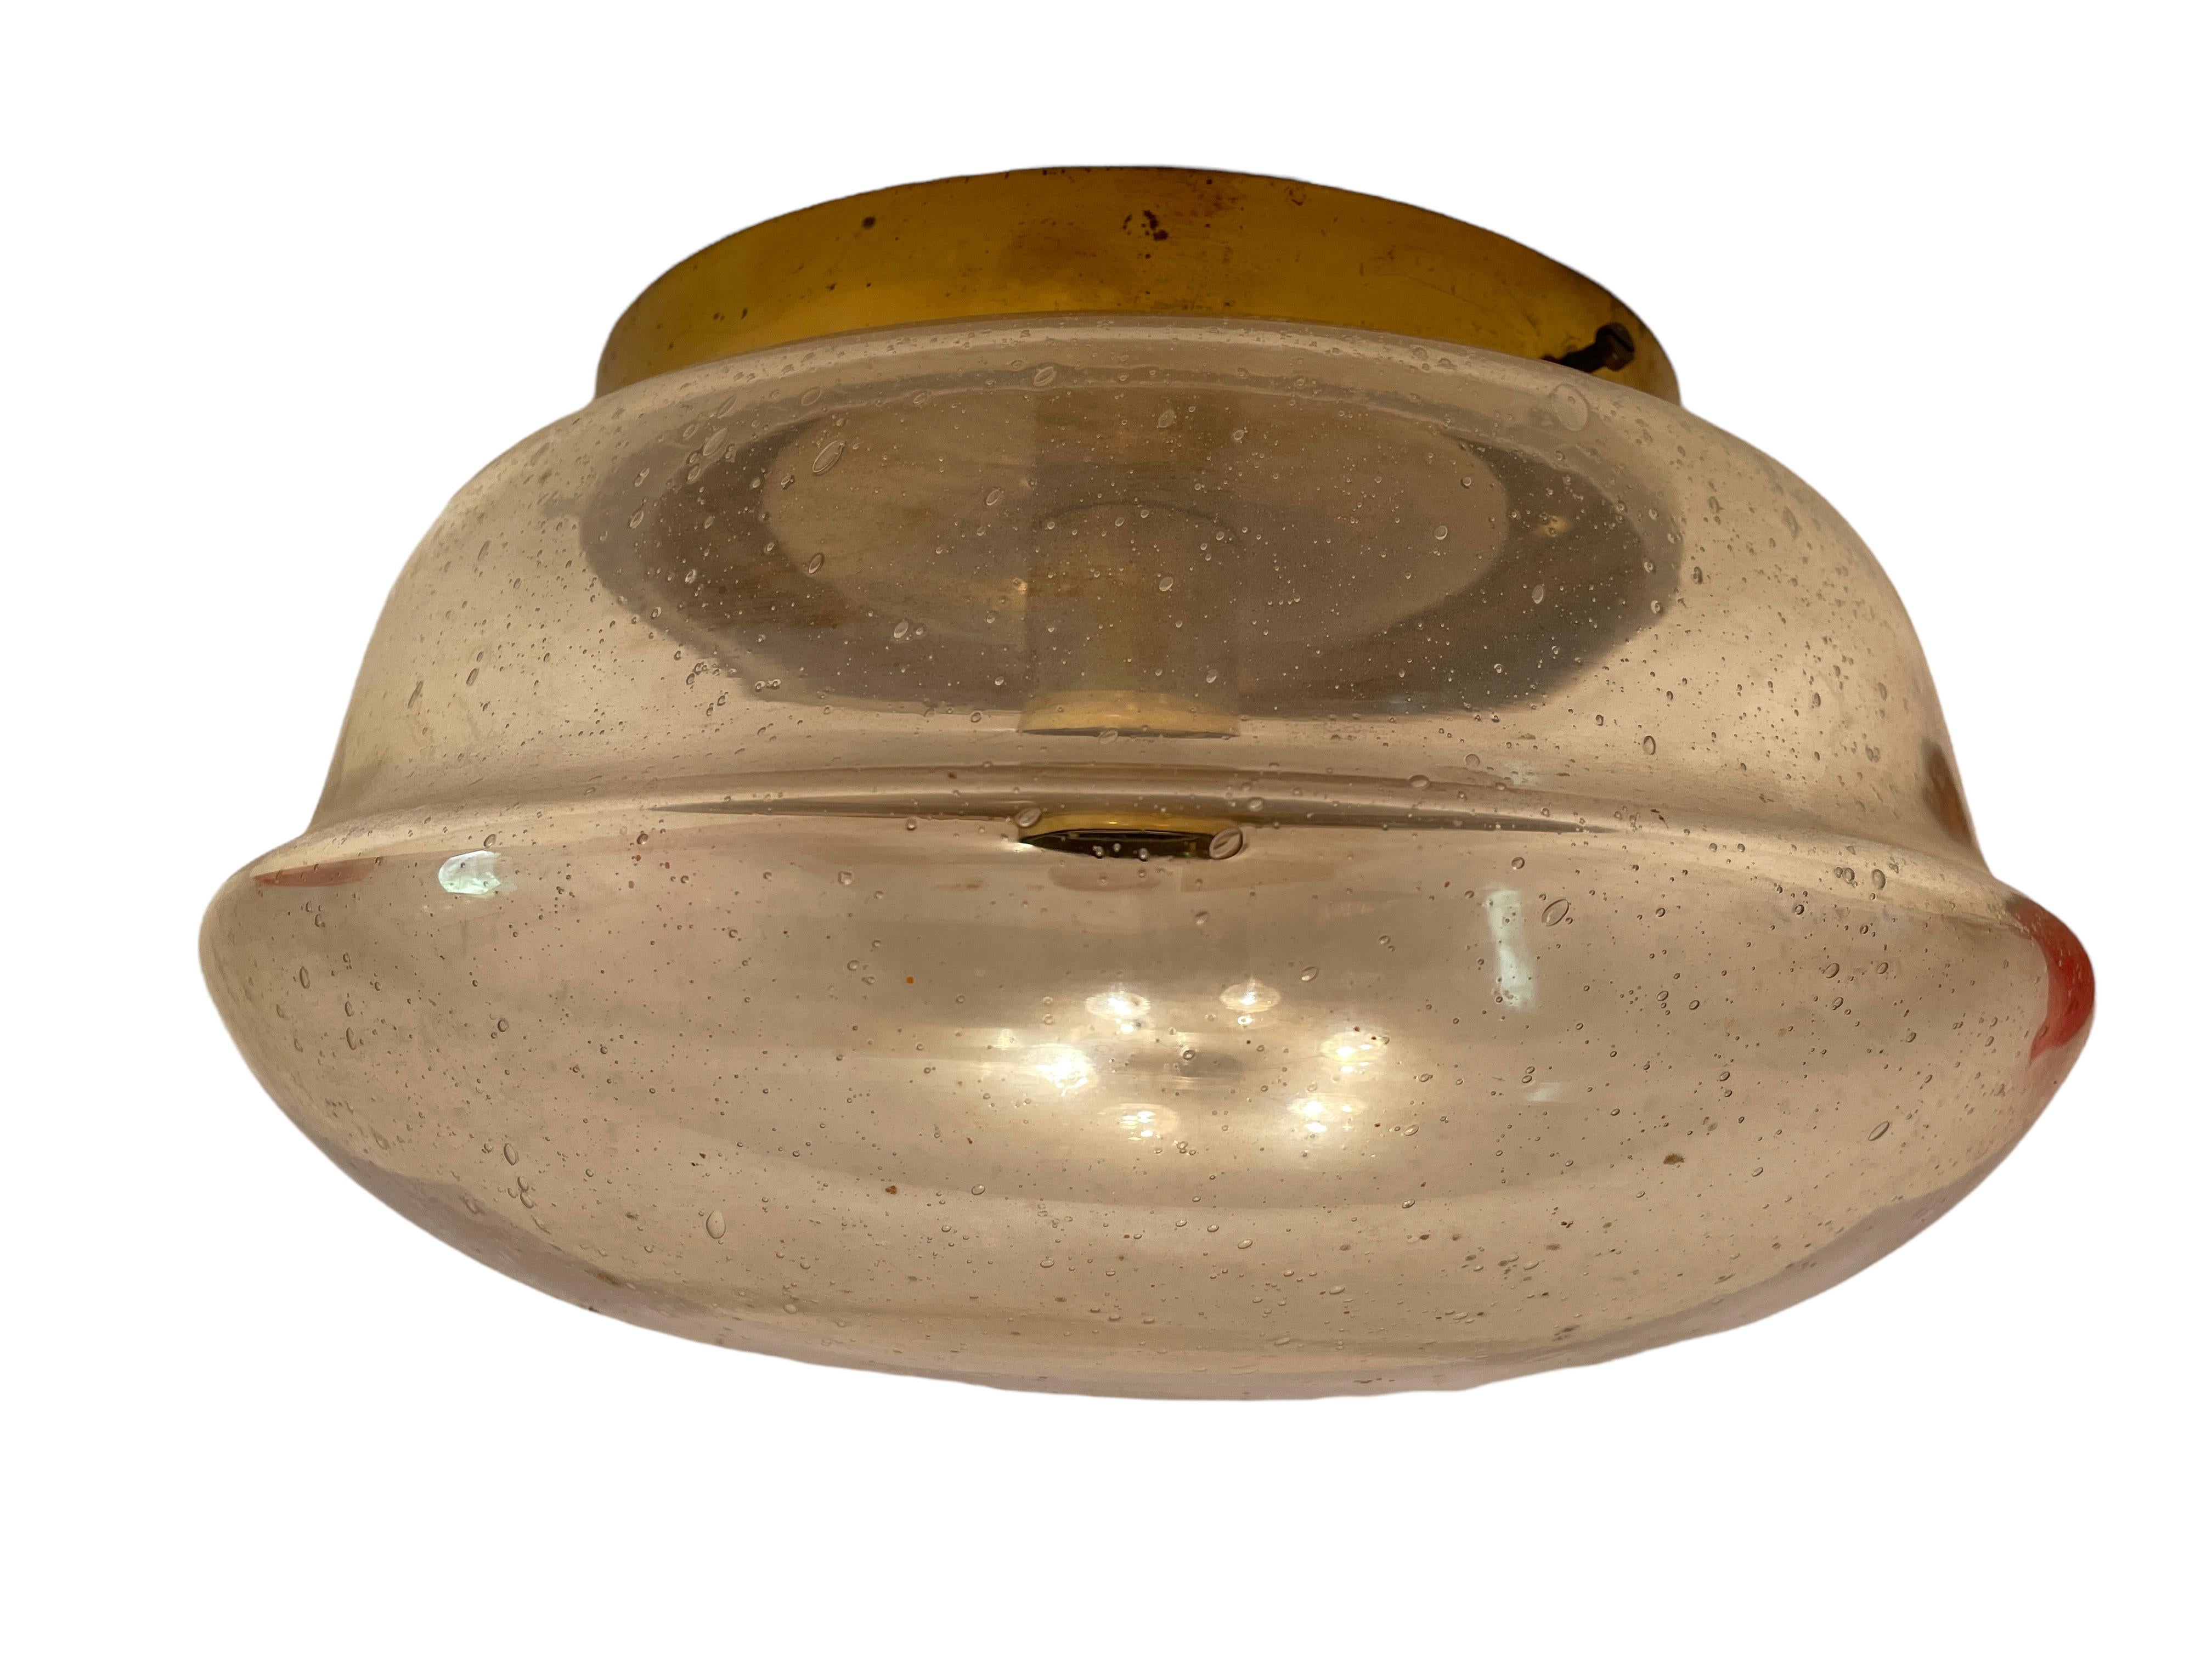 A gorgeous metal flush mount by Hillebrand. Nice smoked amber glass. The flush mount requires one European E27 Edison bulb, up to 75 watts. A nice addition to any room.